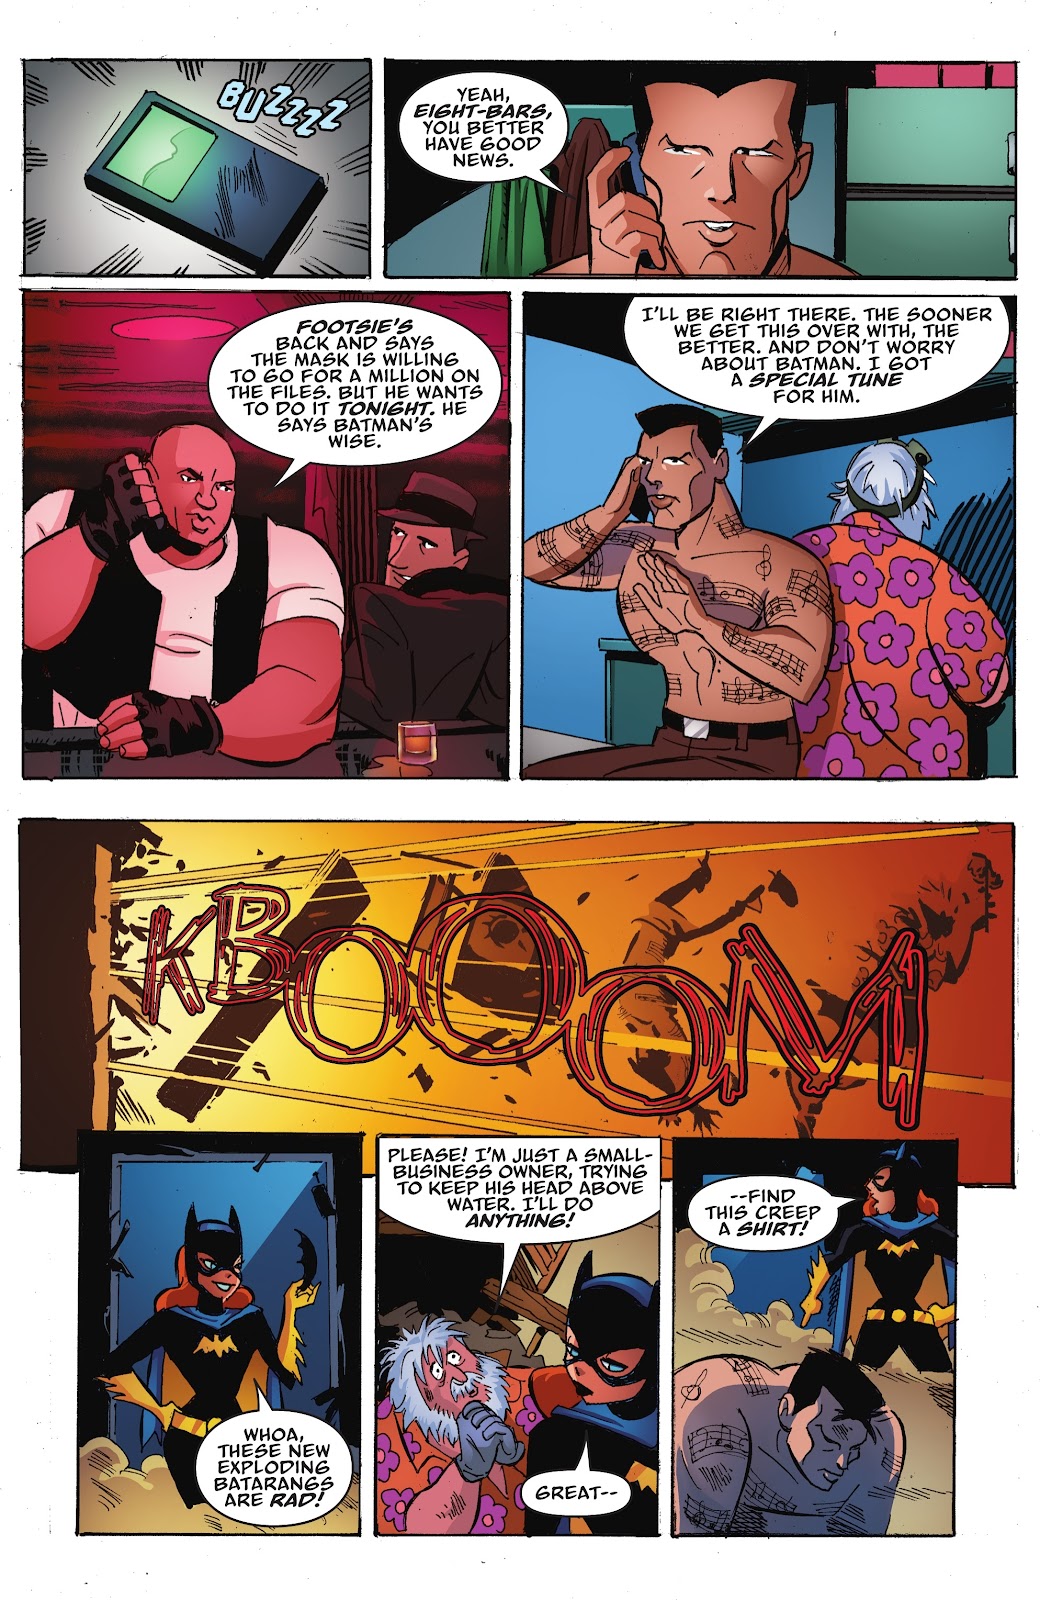 Batman: The Adventures Continue: Season Two issue 3 - Page 8